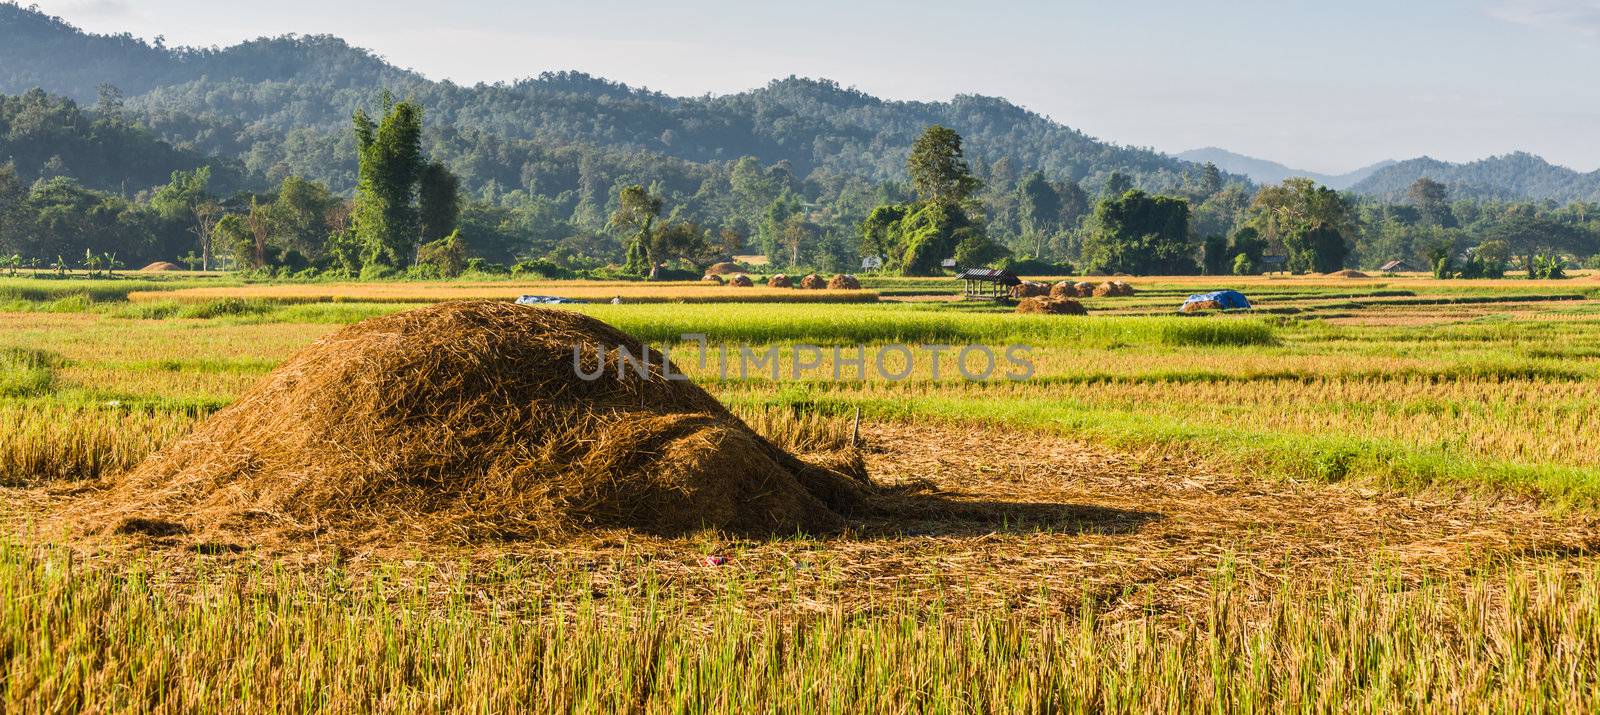 Pile of straw in rice field  by moggara12